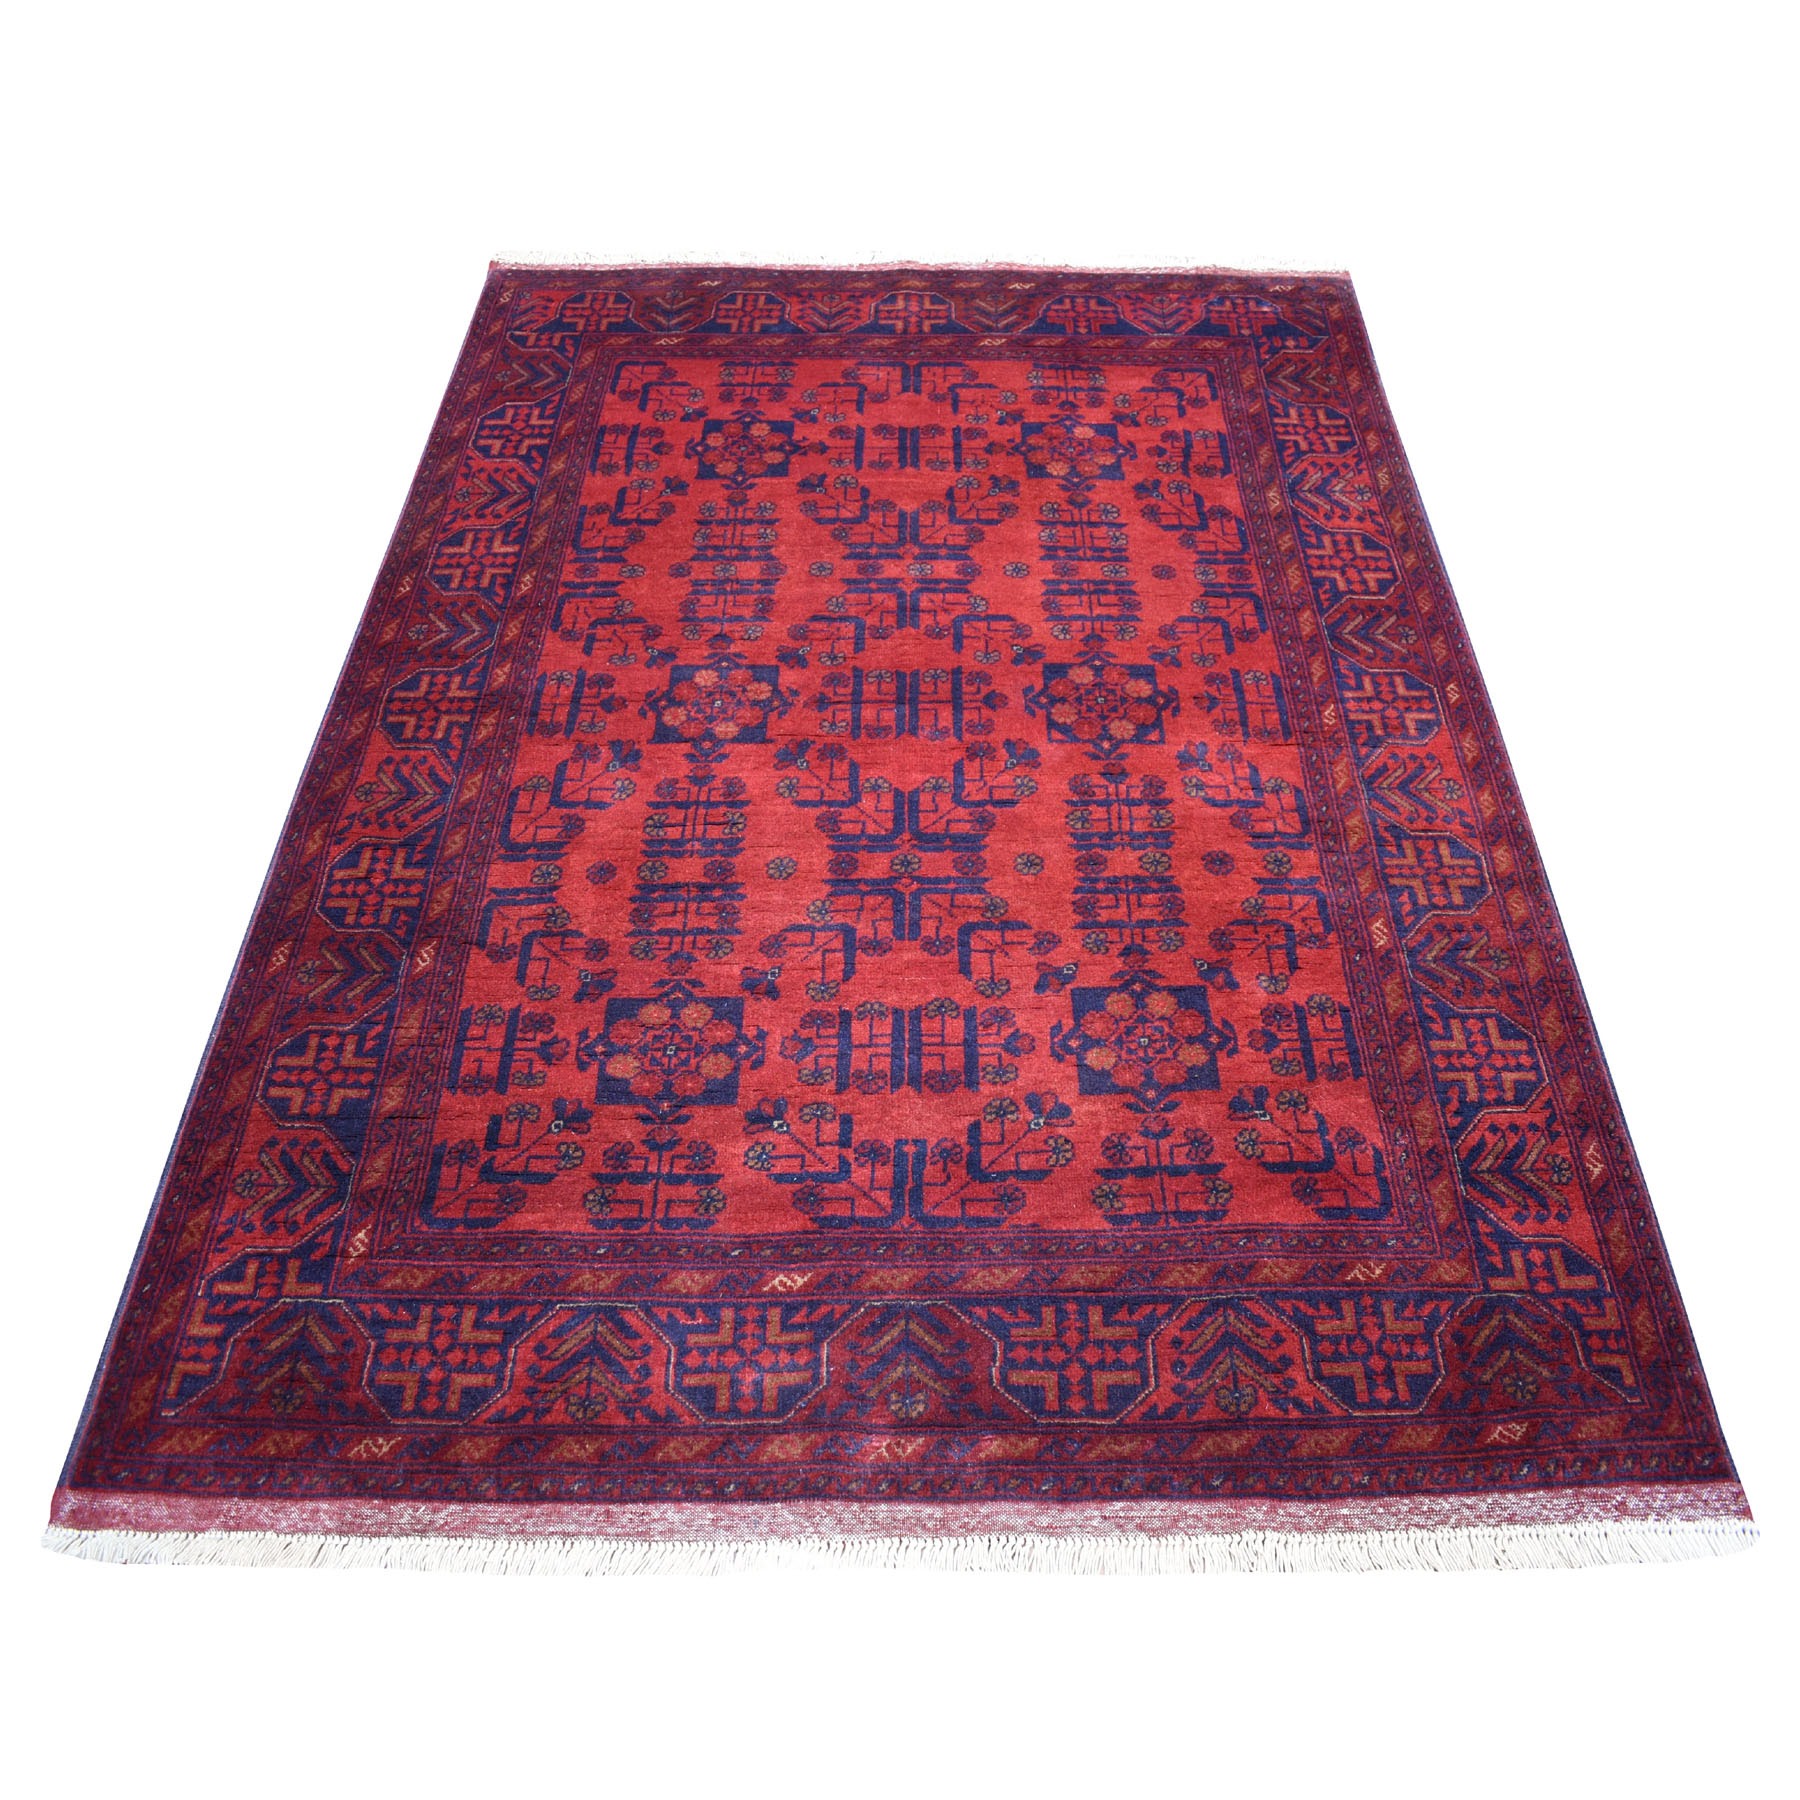 4-9 x6-5  Deep and Saturated Red Tribal Design Afghan Andkhoy Pure Wool Hand-Knotted Oriental Rug 